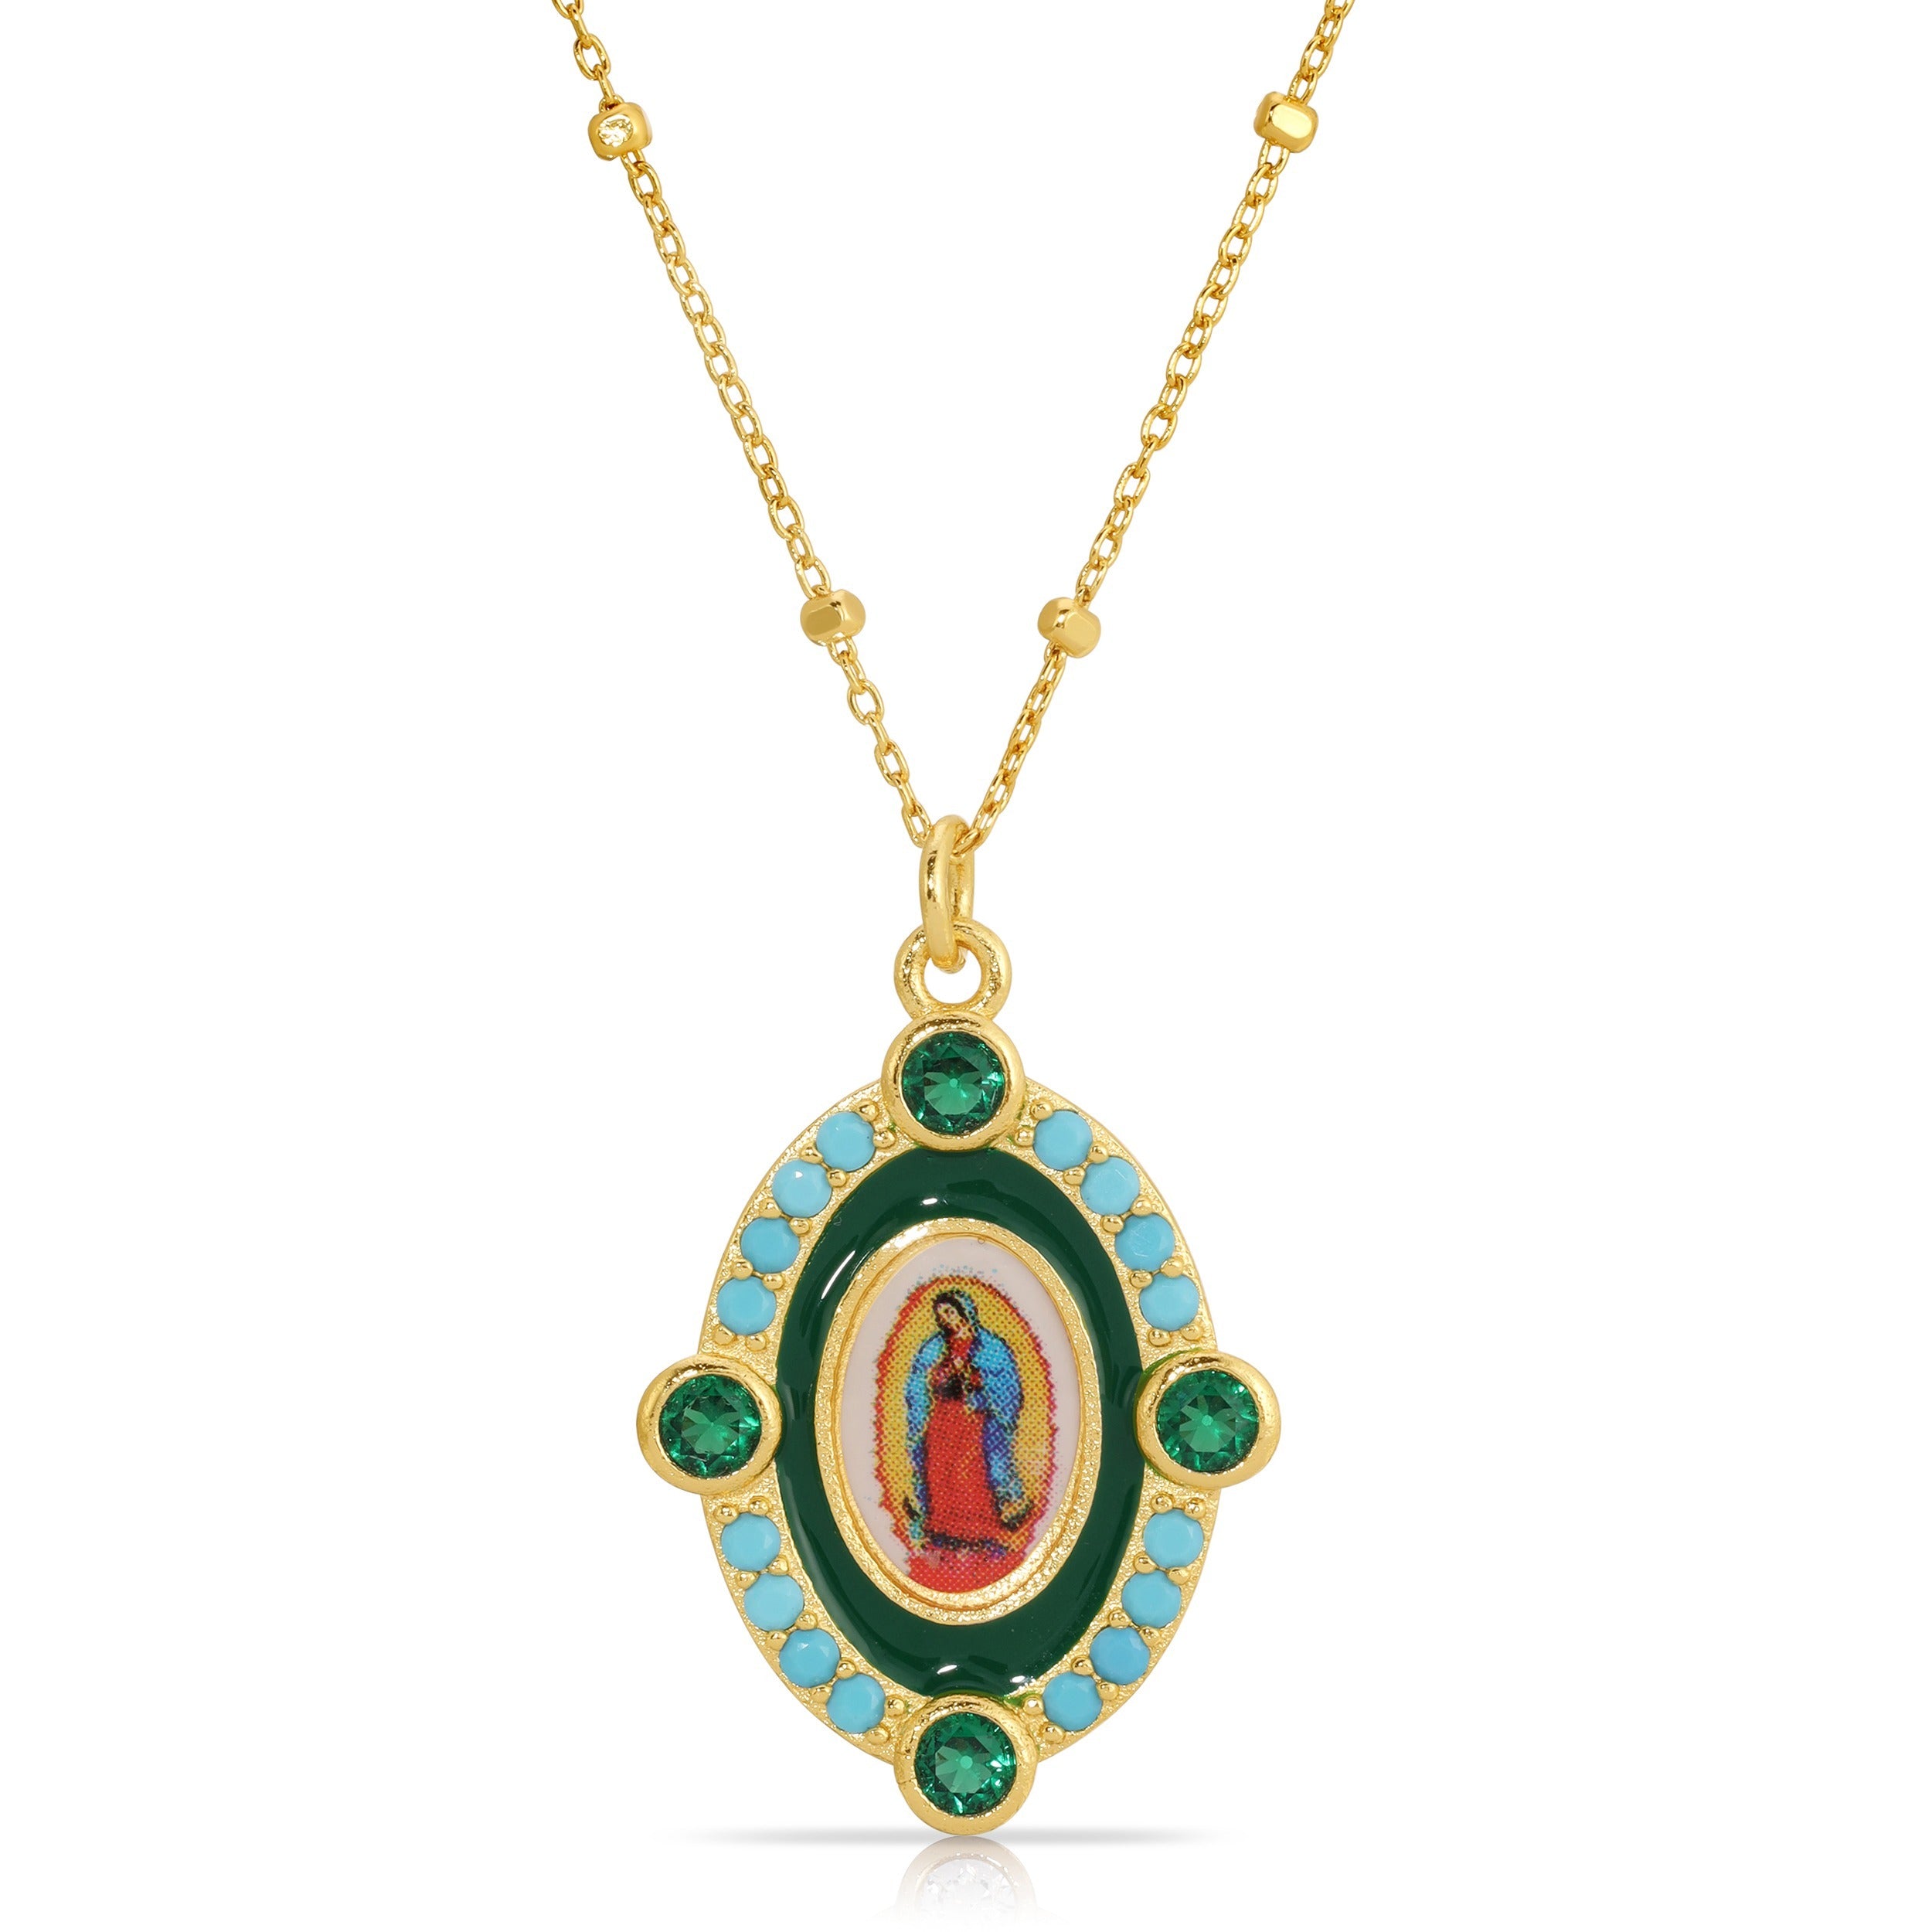 Our Lady Guadalupe Enamel Necklace